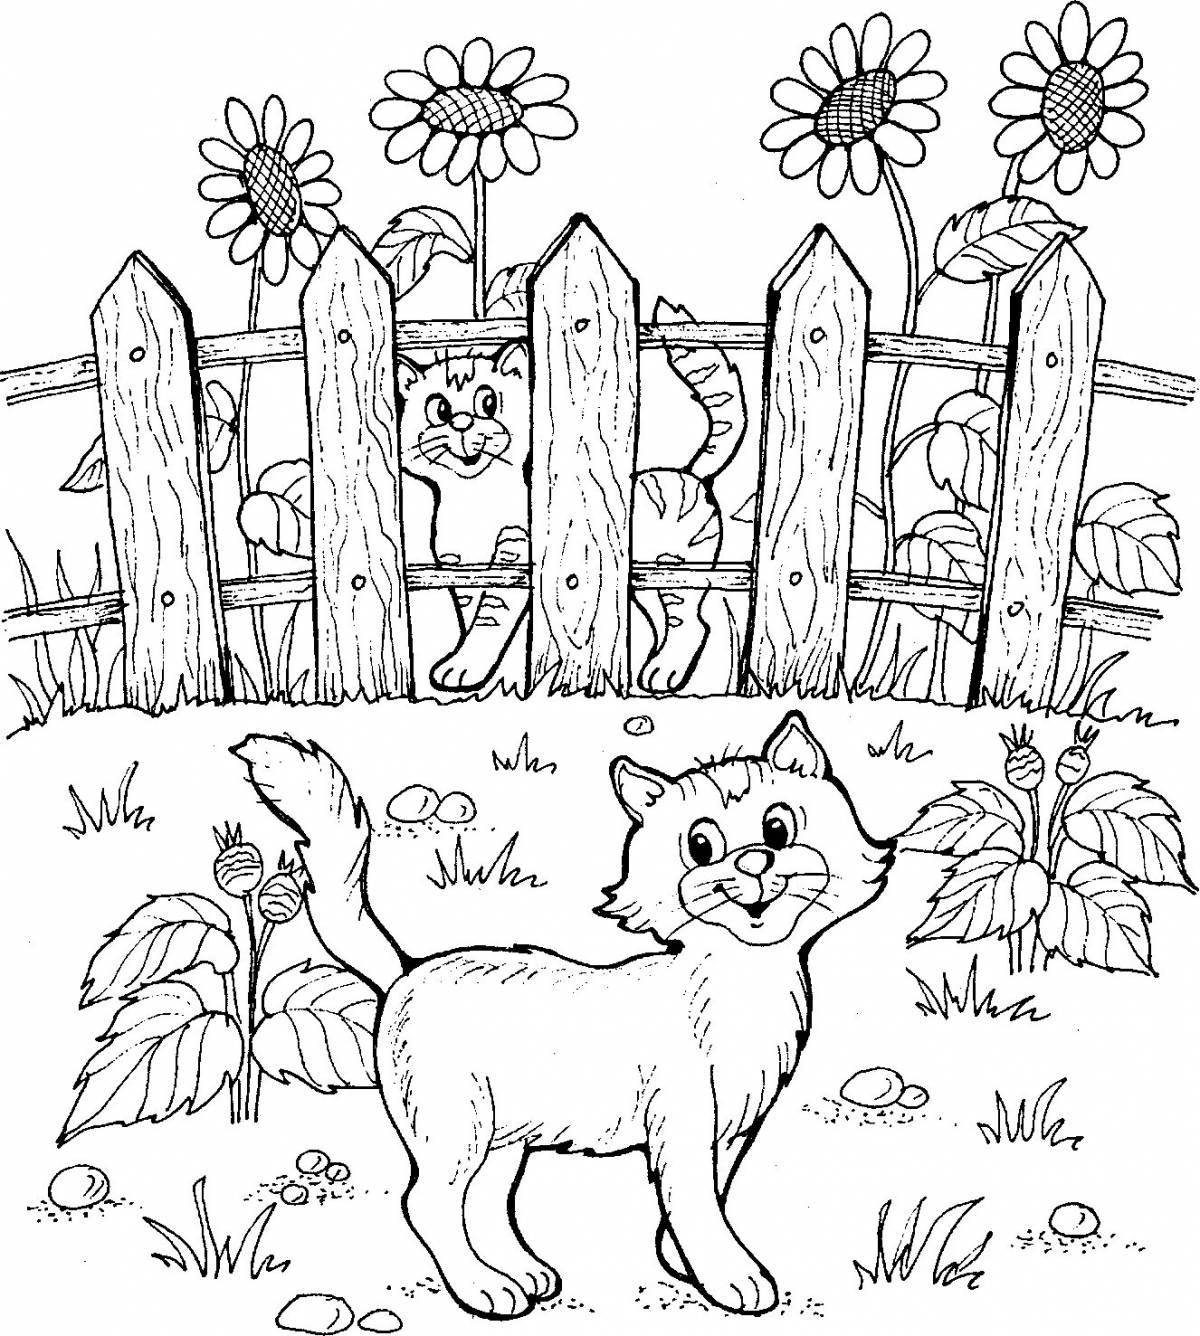 Coloring book tempting fence for kids